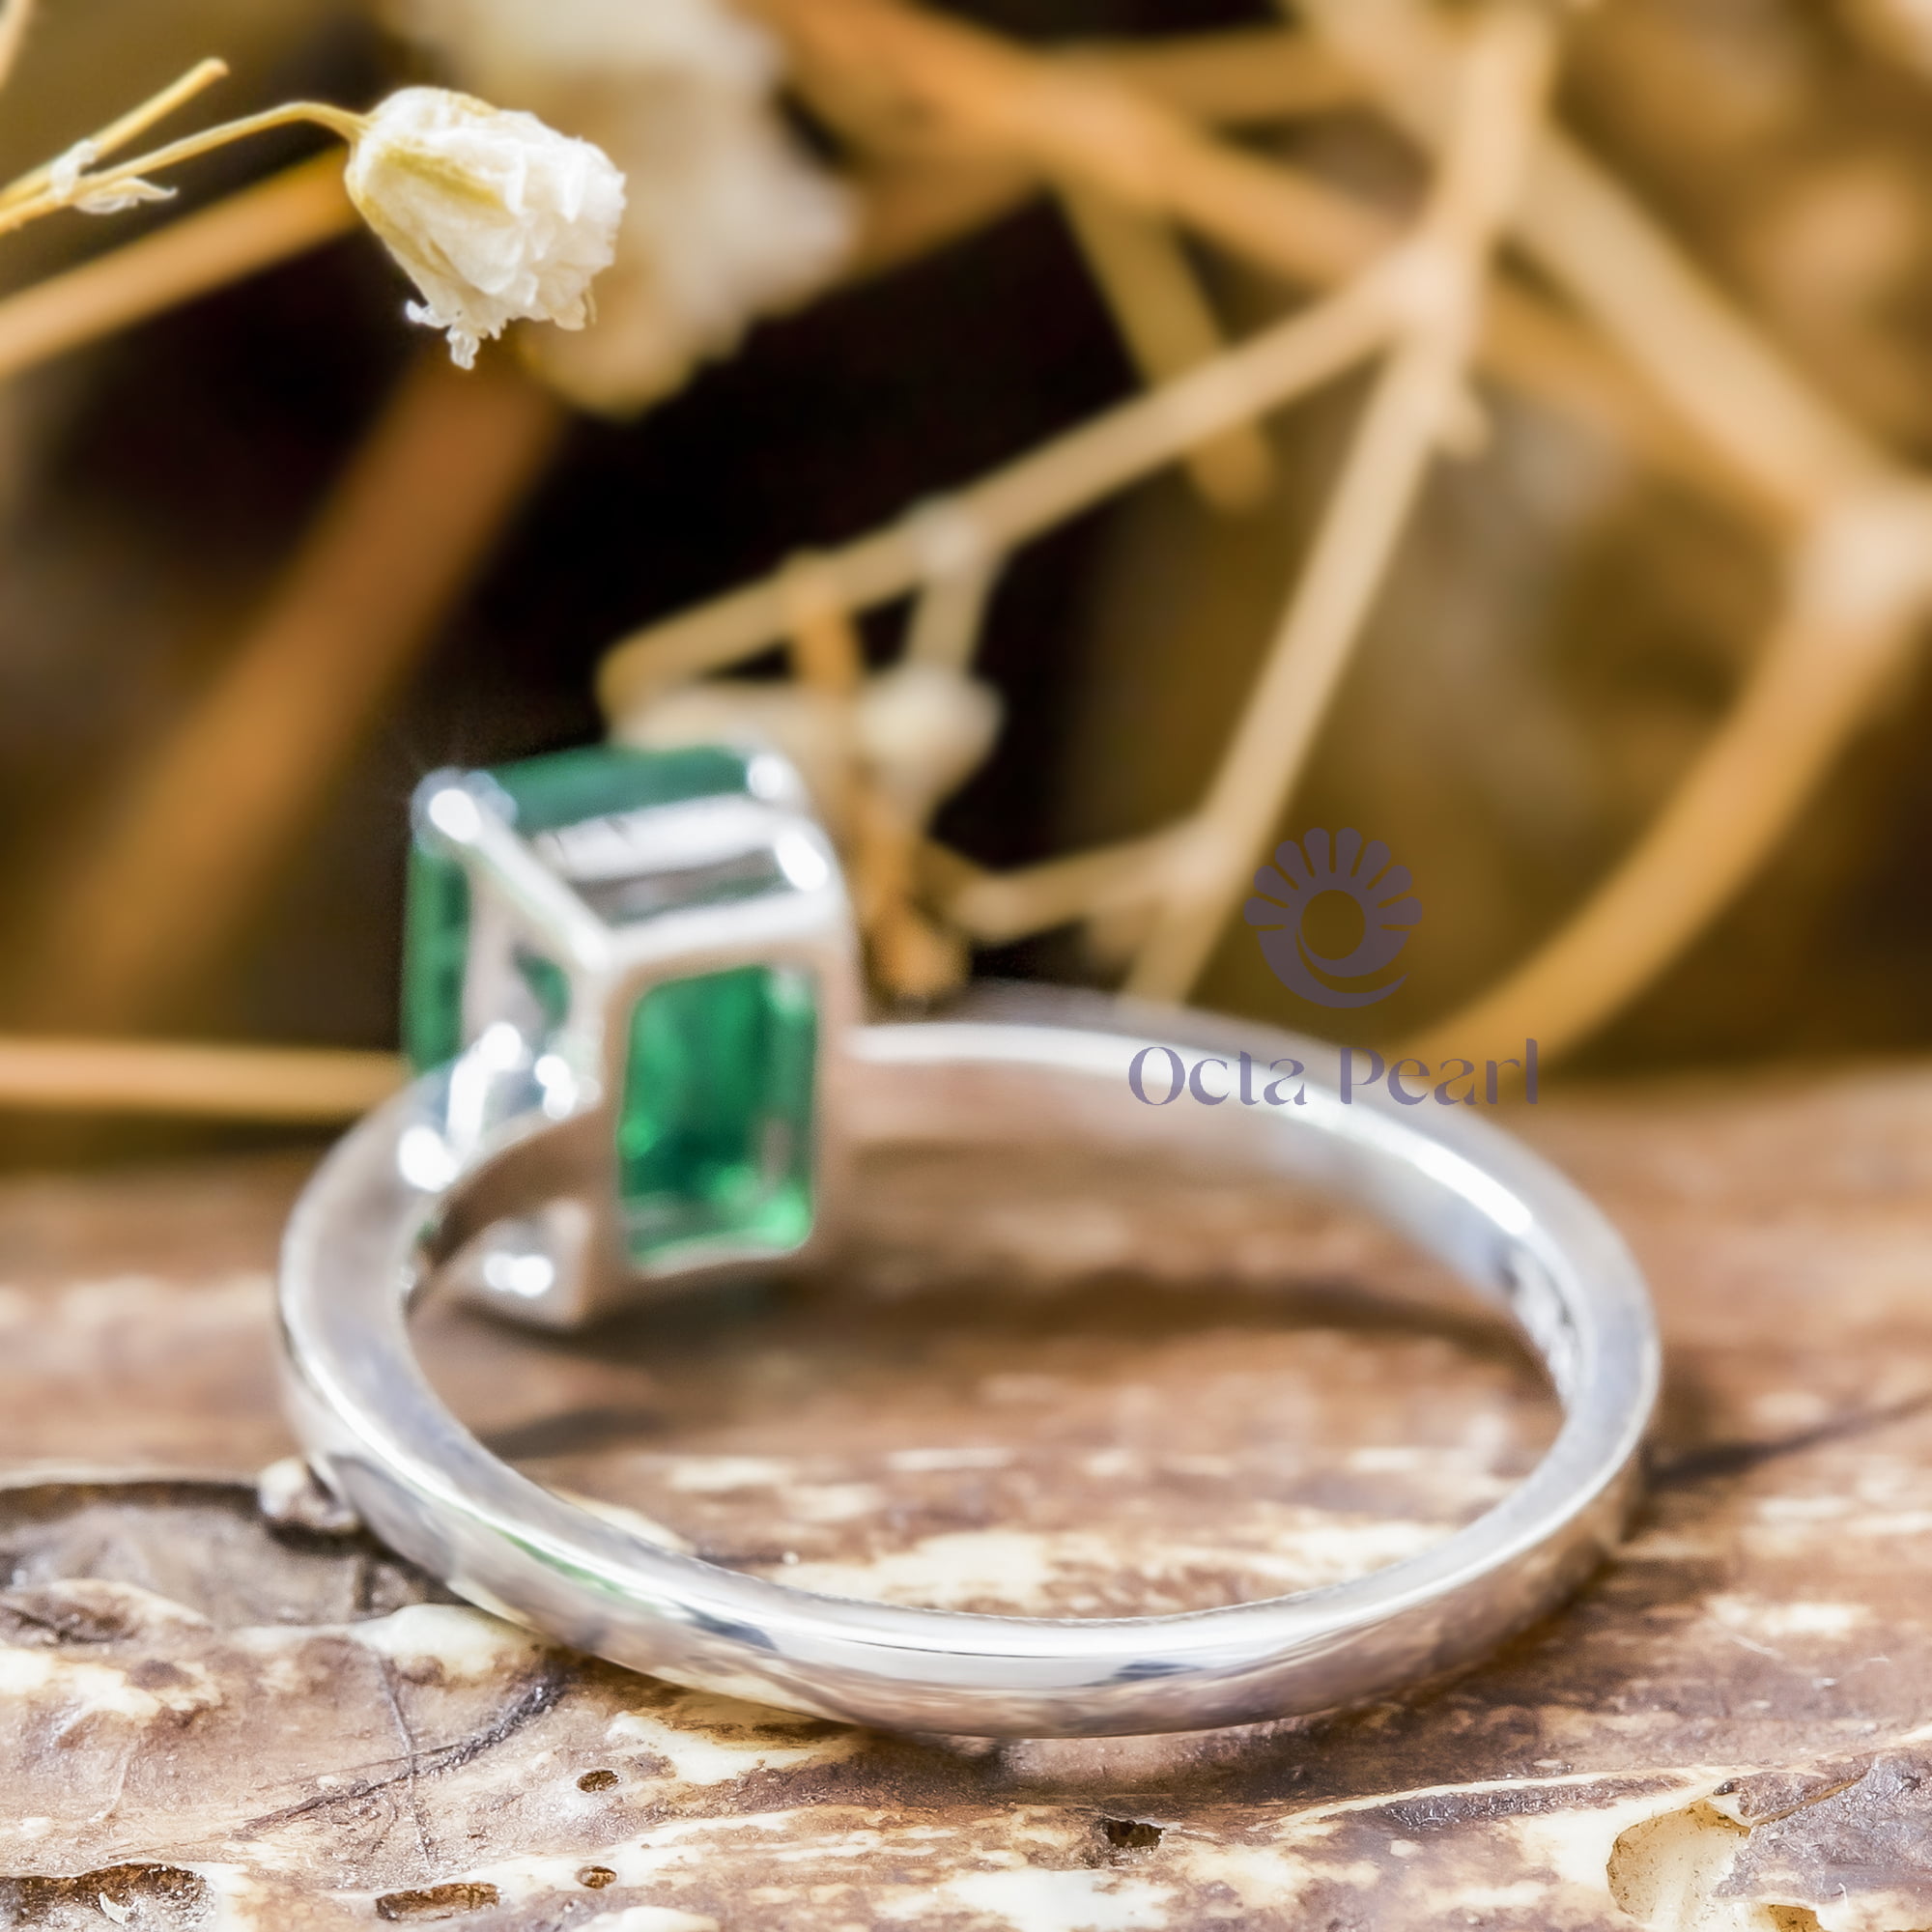 Solitaire Emerald Cut CZ Green Stone Engagement Wedding Ring For Women (1 3/4 TCW)